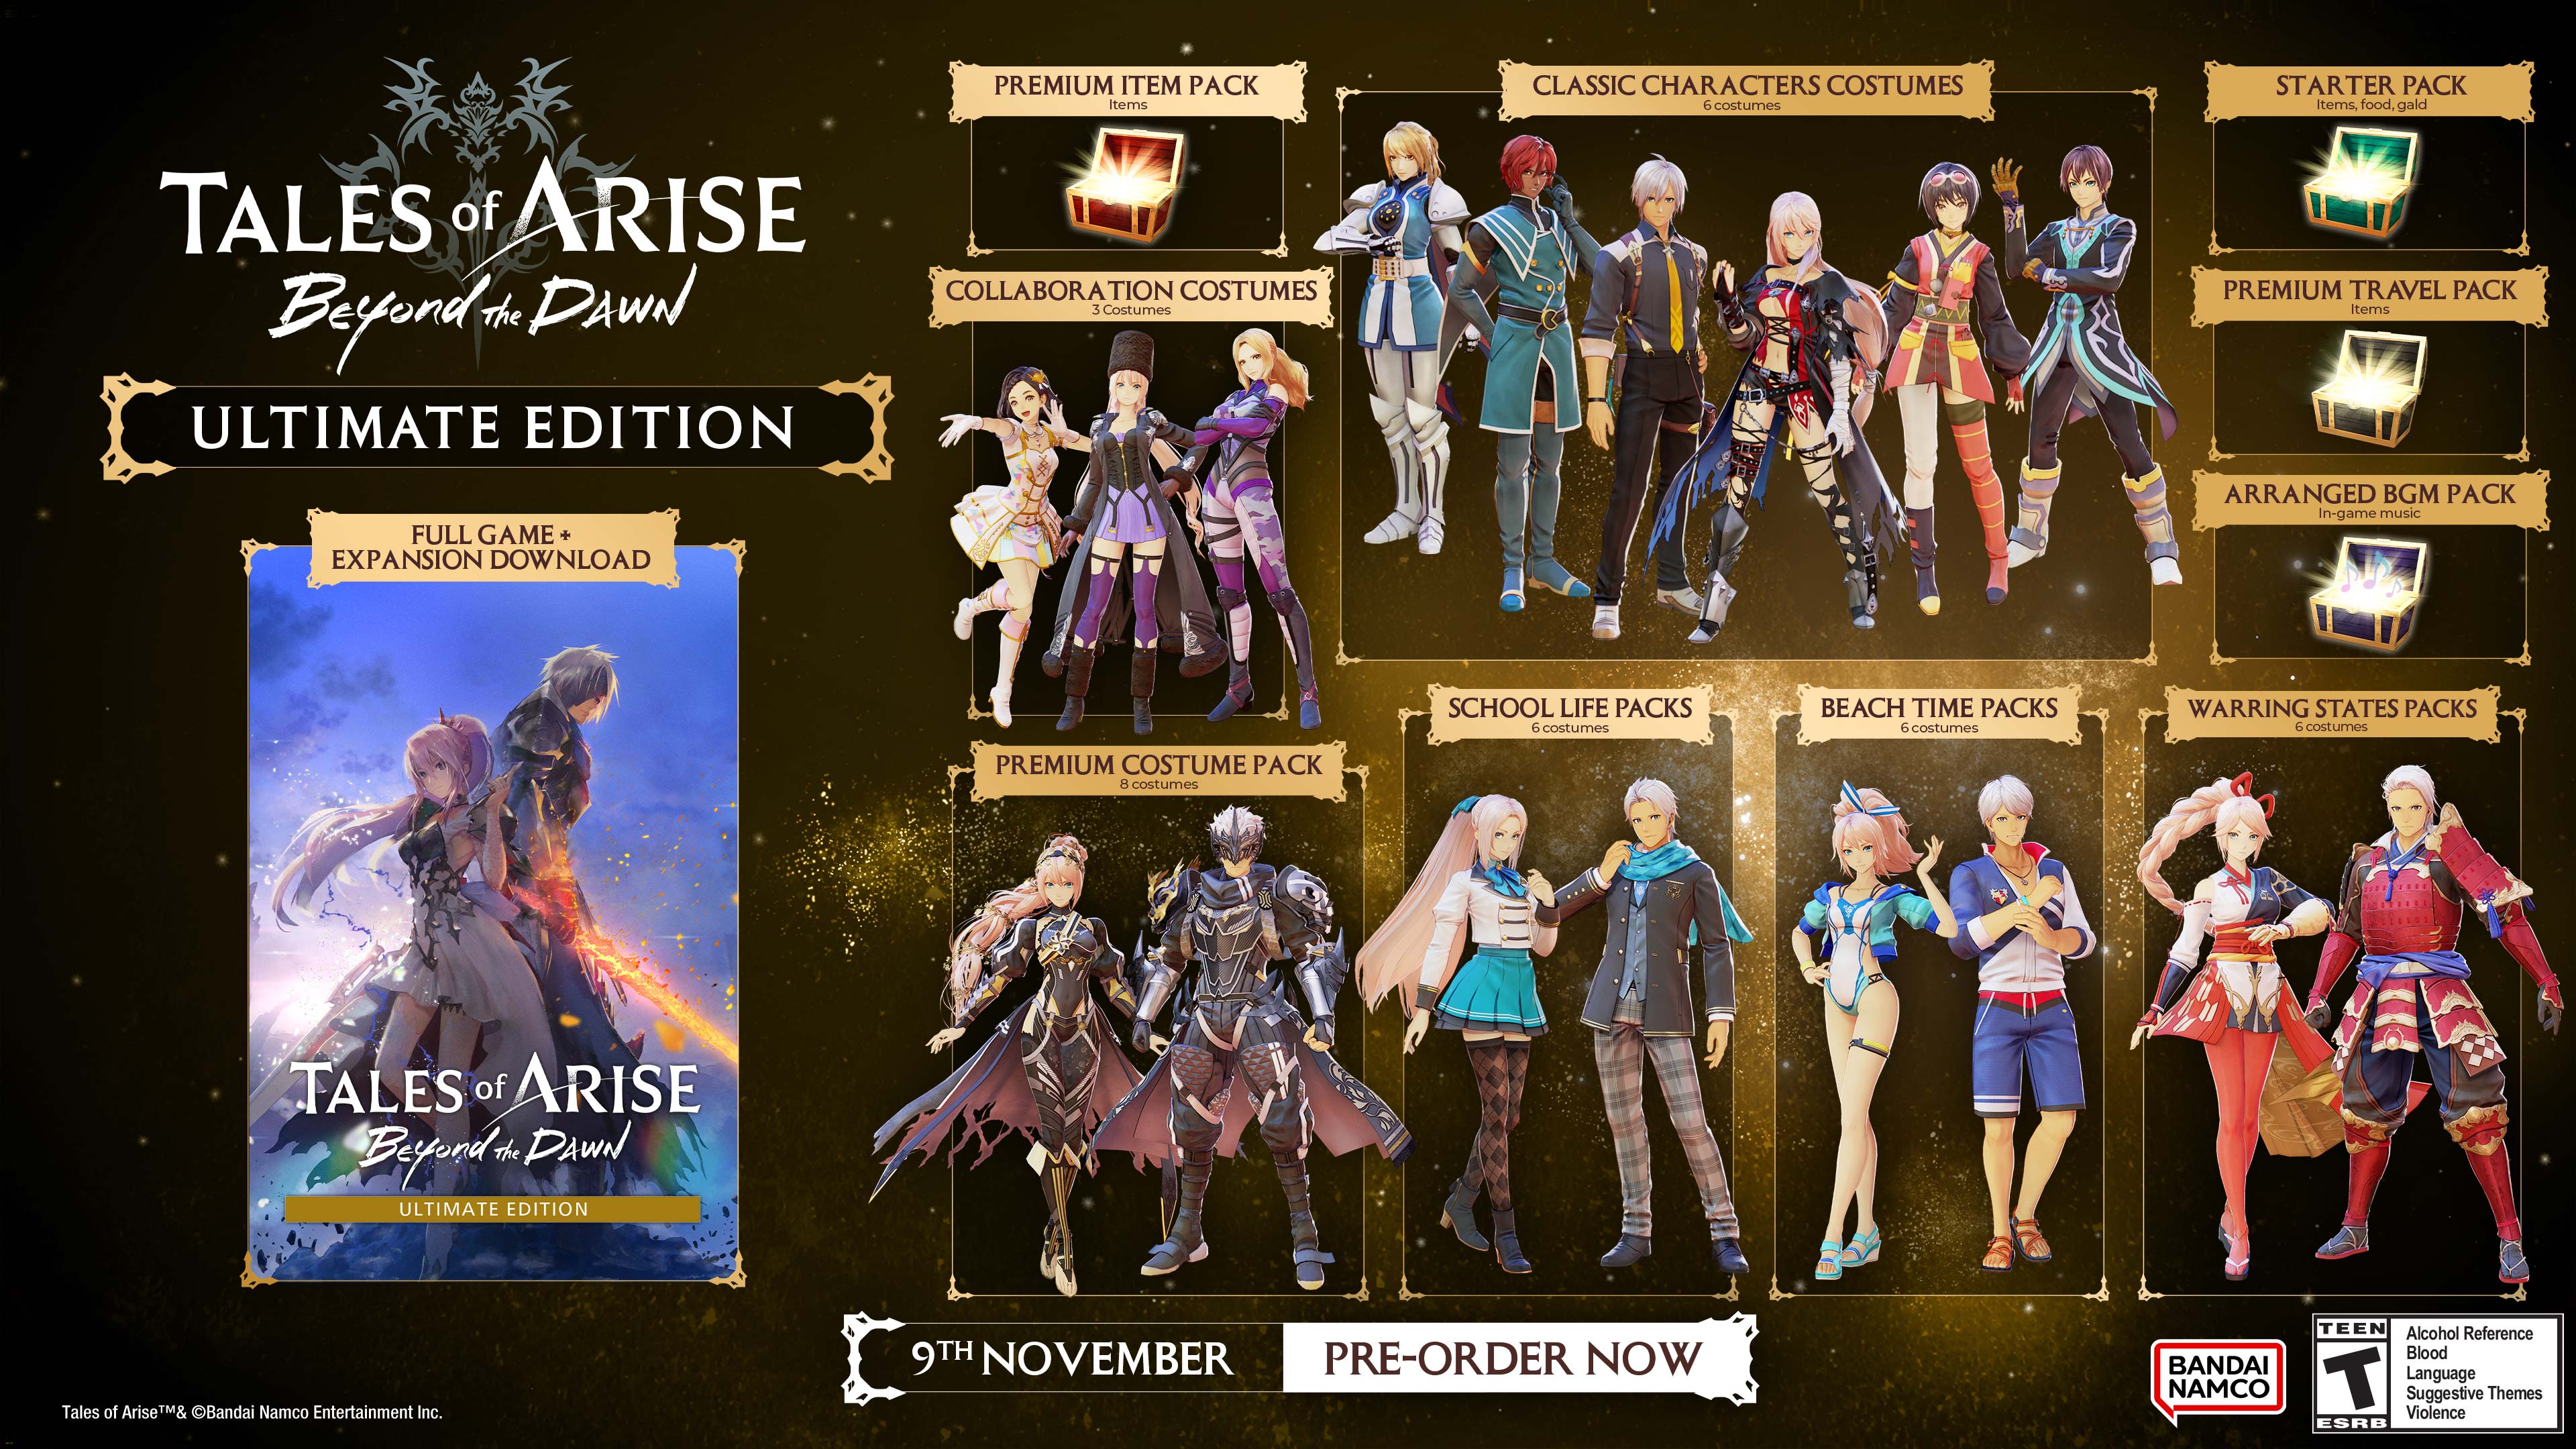 Tales of Arise Beyond the Dawn Ultimate Edition Product Overview